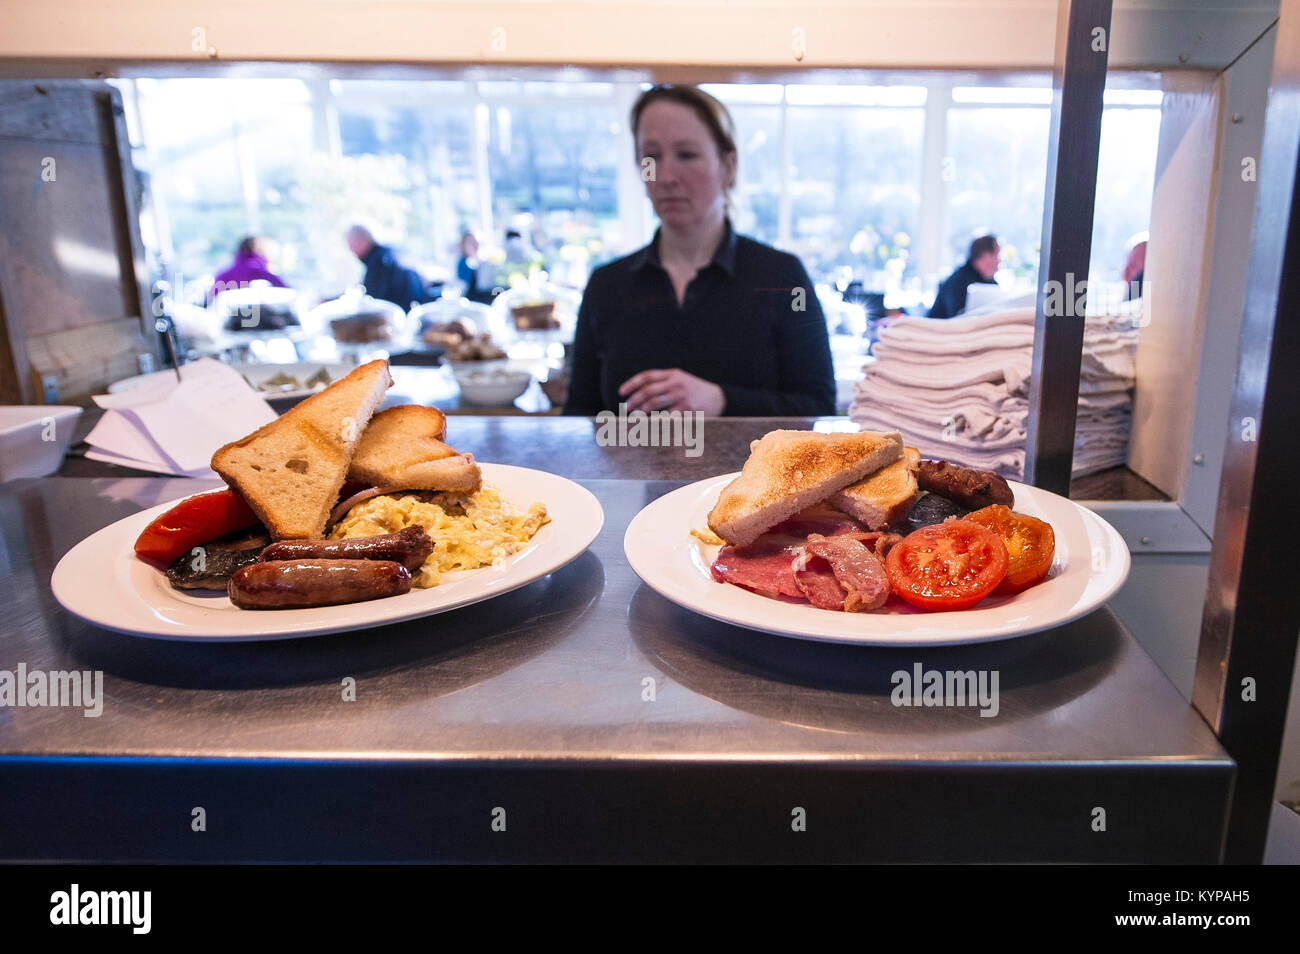 Food preparation - two full english breakfasts waiting at the pass in a restaurant. Stock Photo